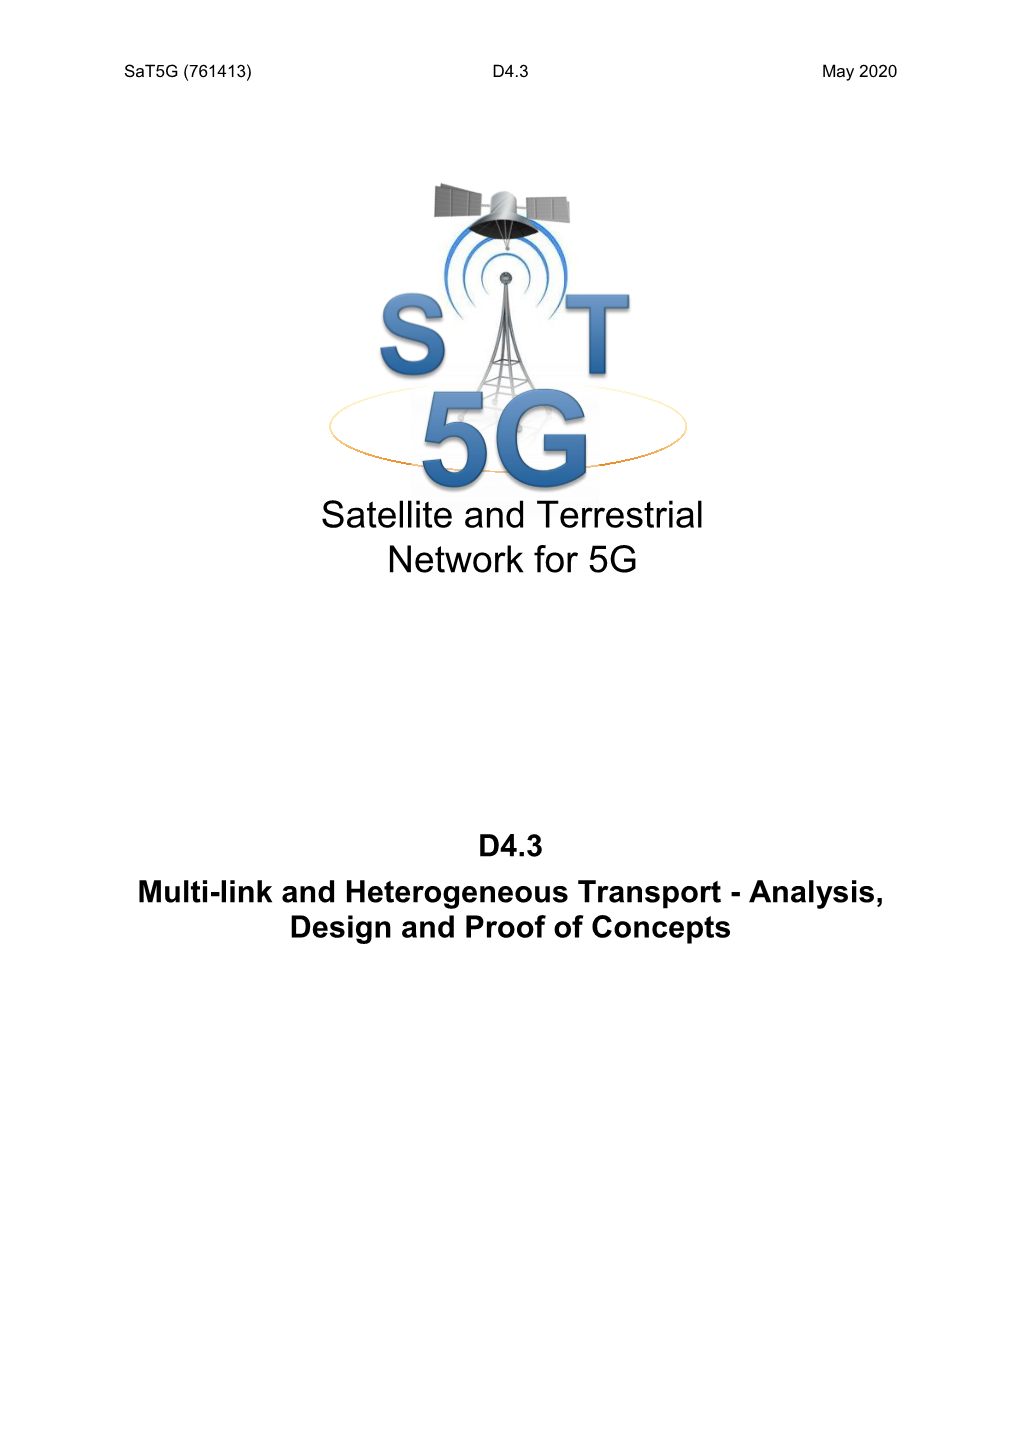 Satellite and Terrestrial Network for 5G